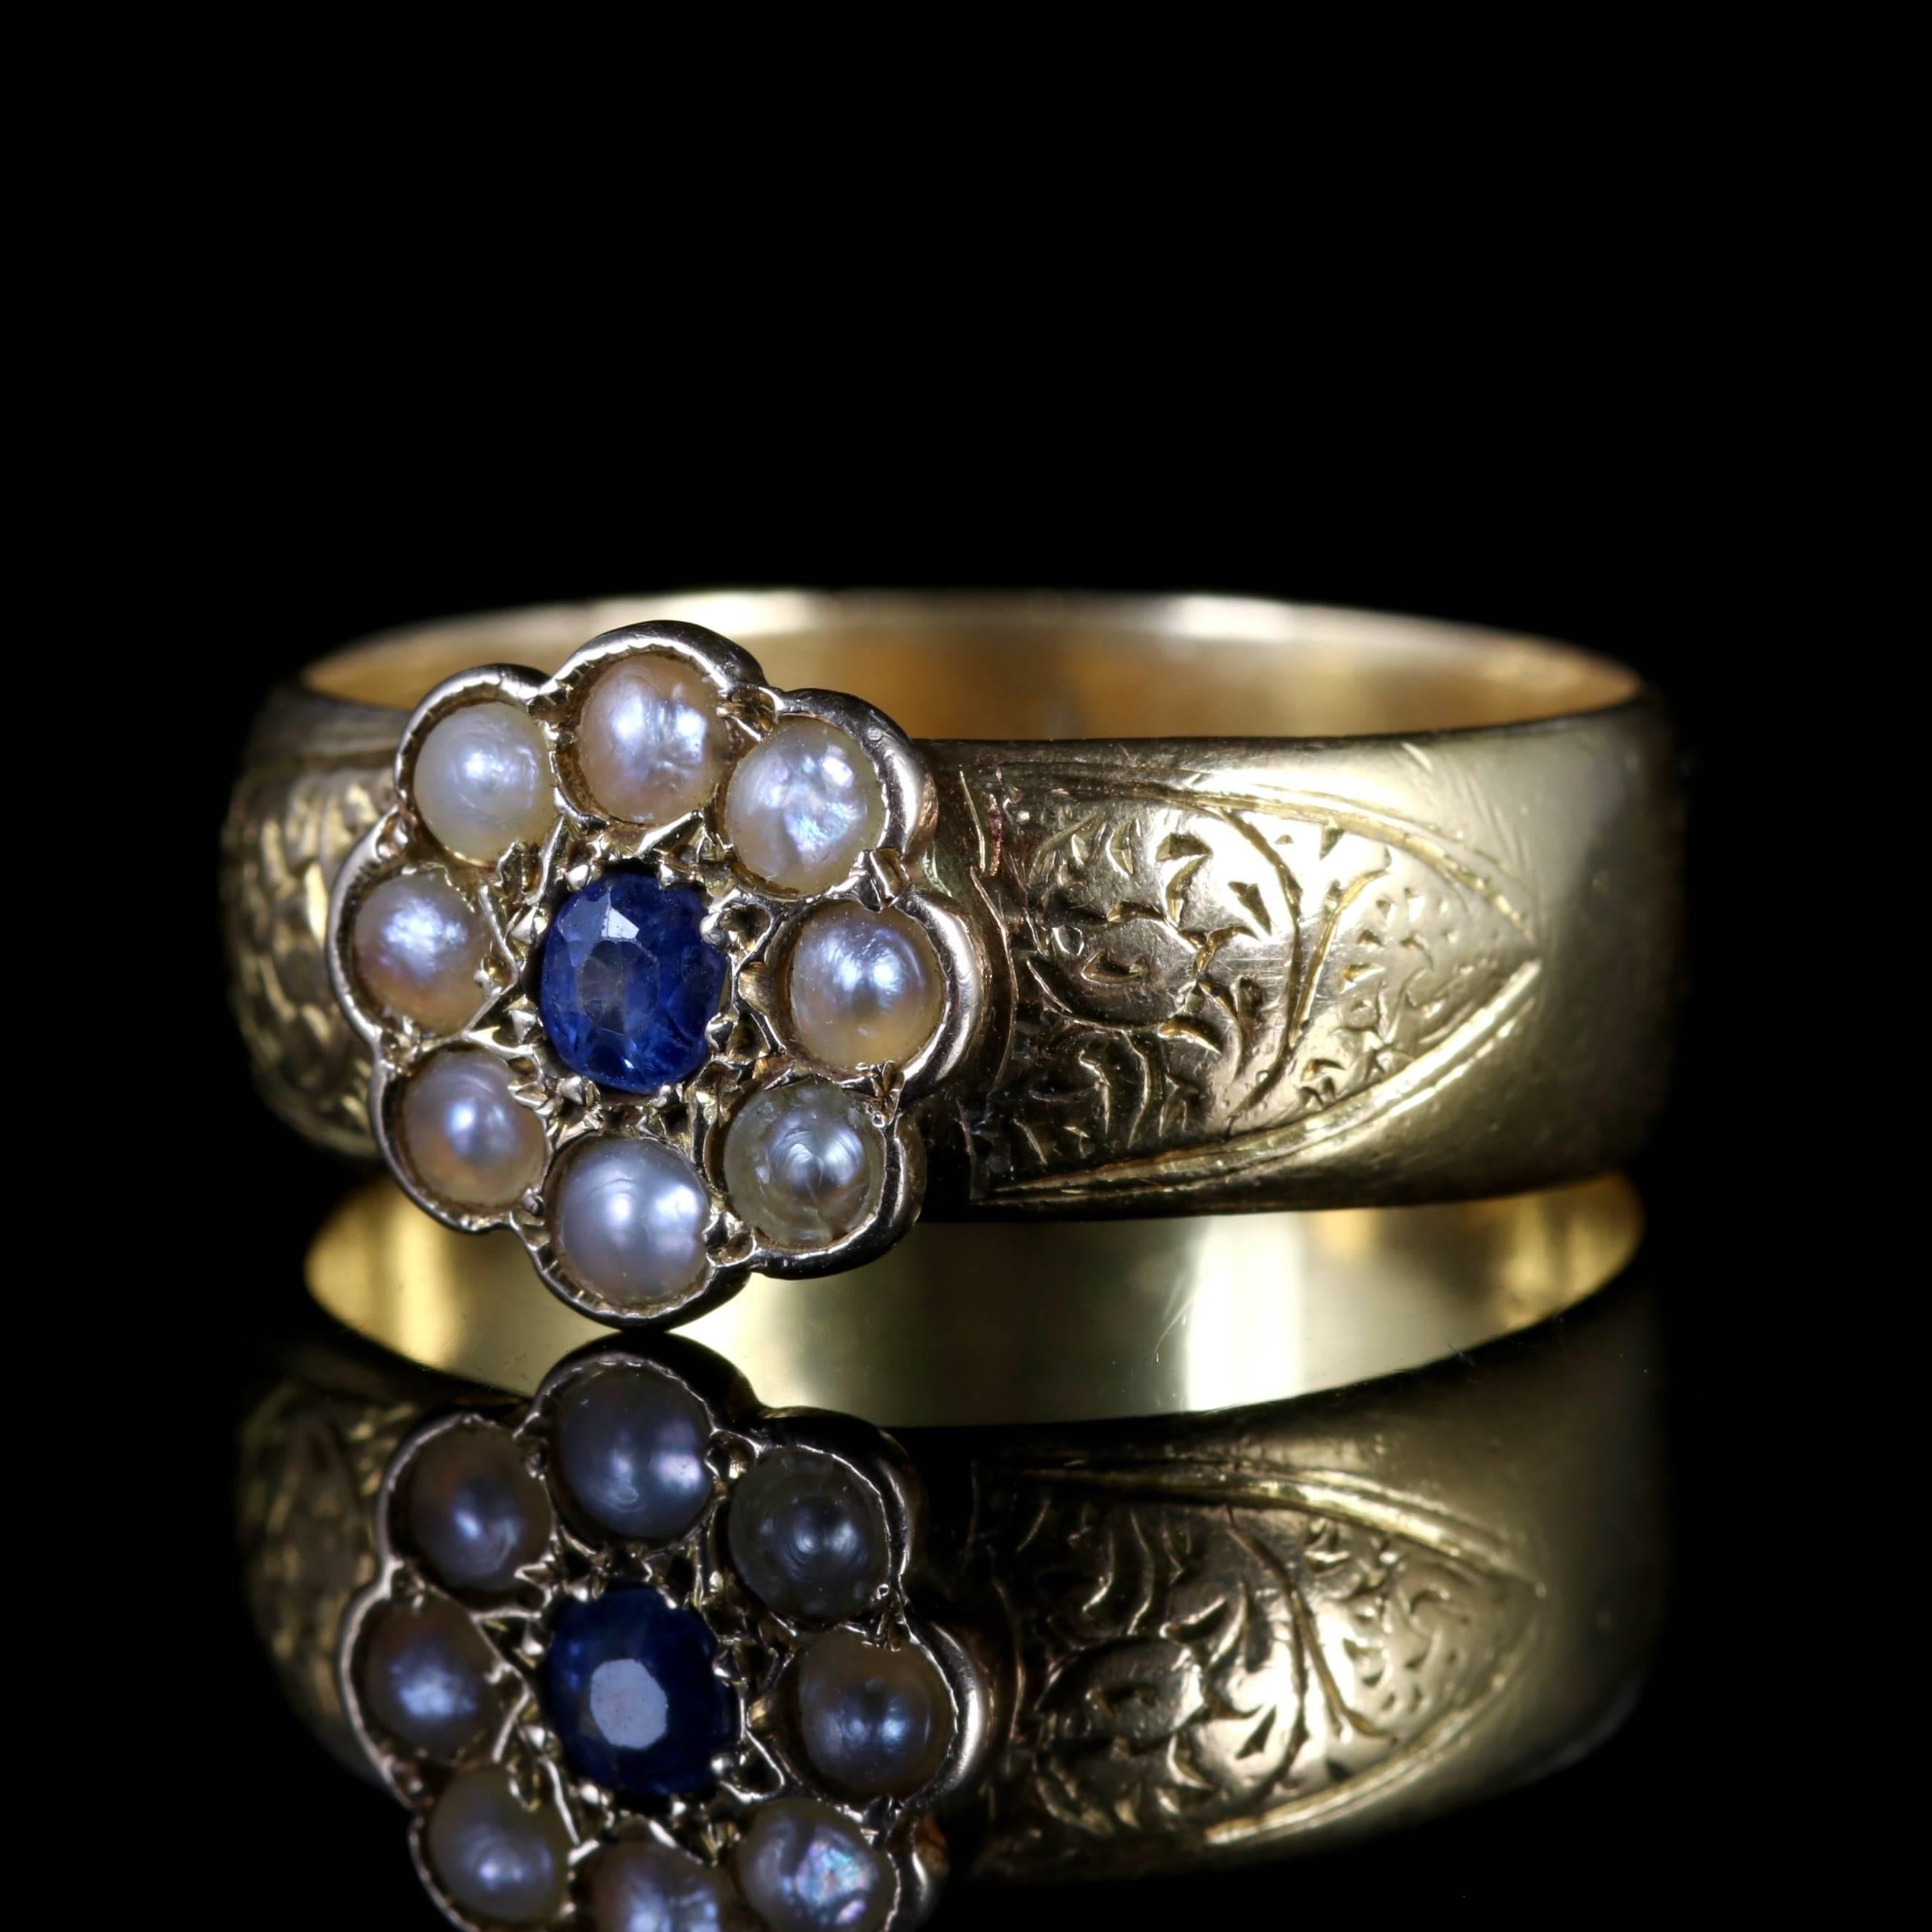 A fabulous Victorian Sapphire and Pearl is set in 18ct Yellow Gold, Circa 1900.

The ring boasts a rich, blue Sapphire which is surrounded by lustrous Pearls which depicts a pretty flower.

The shoulders are both engraved, showing fabulous